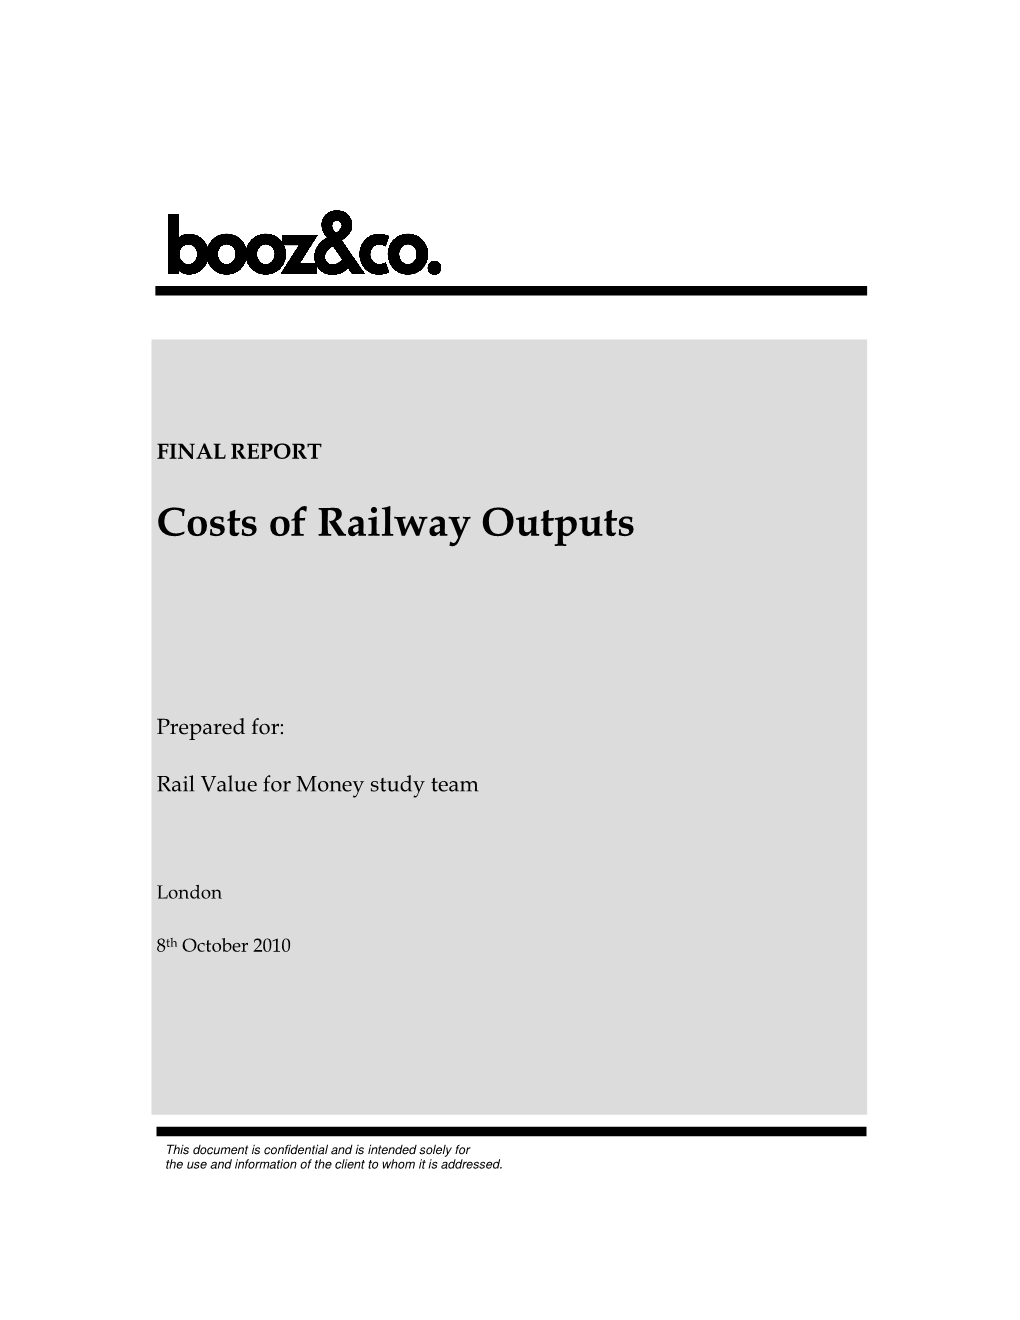 Cost of Railway Outputs